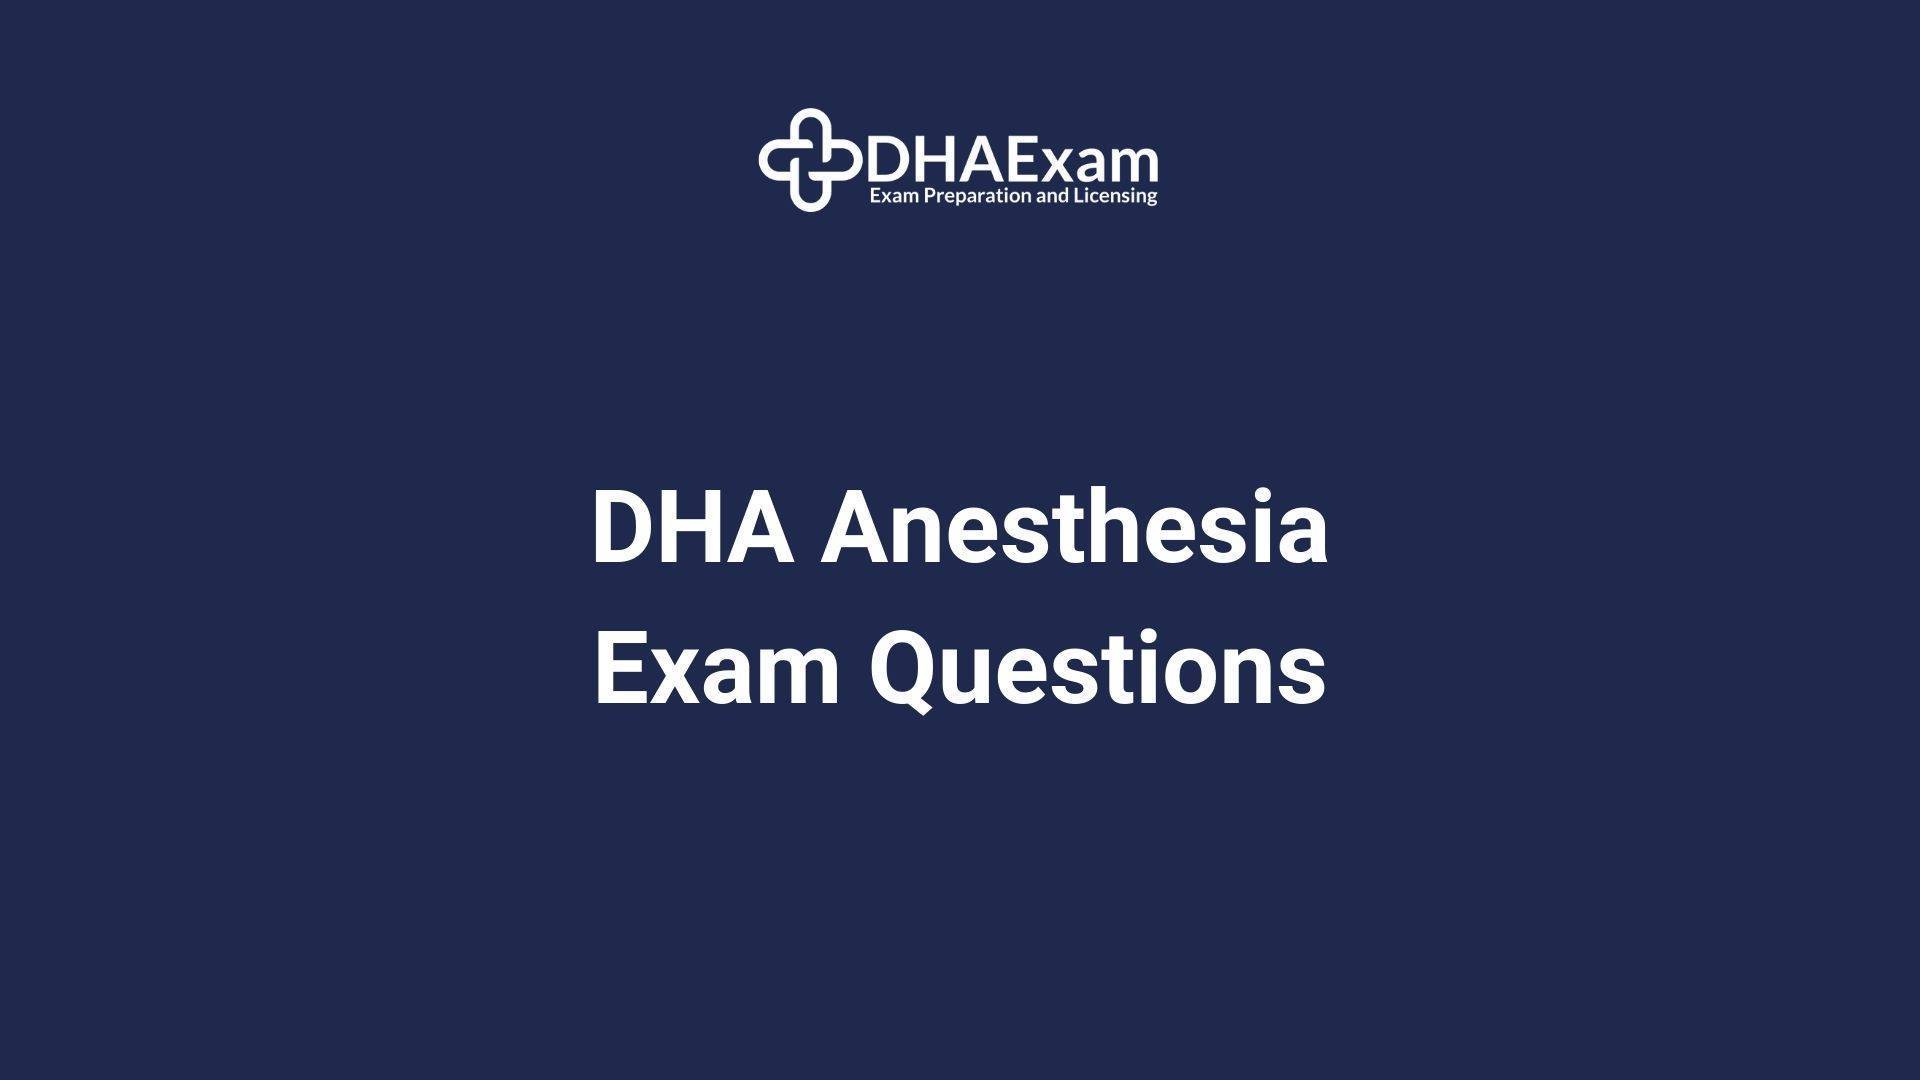 Dha Anesthesia Exam Questions